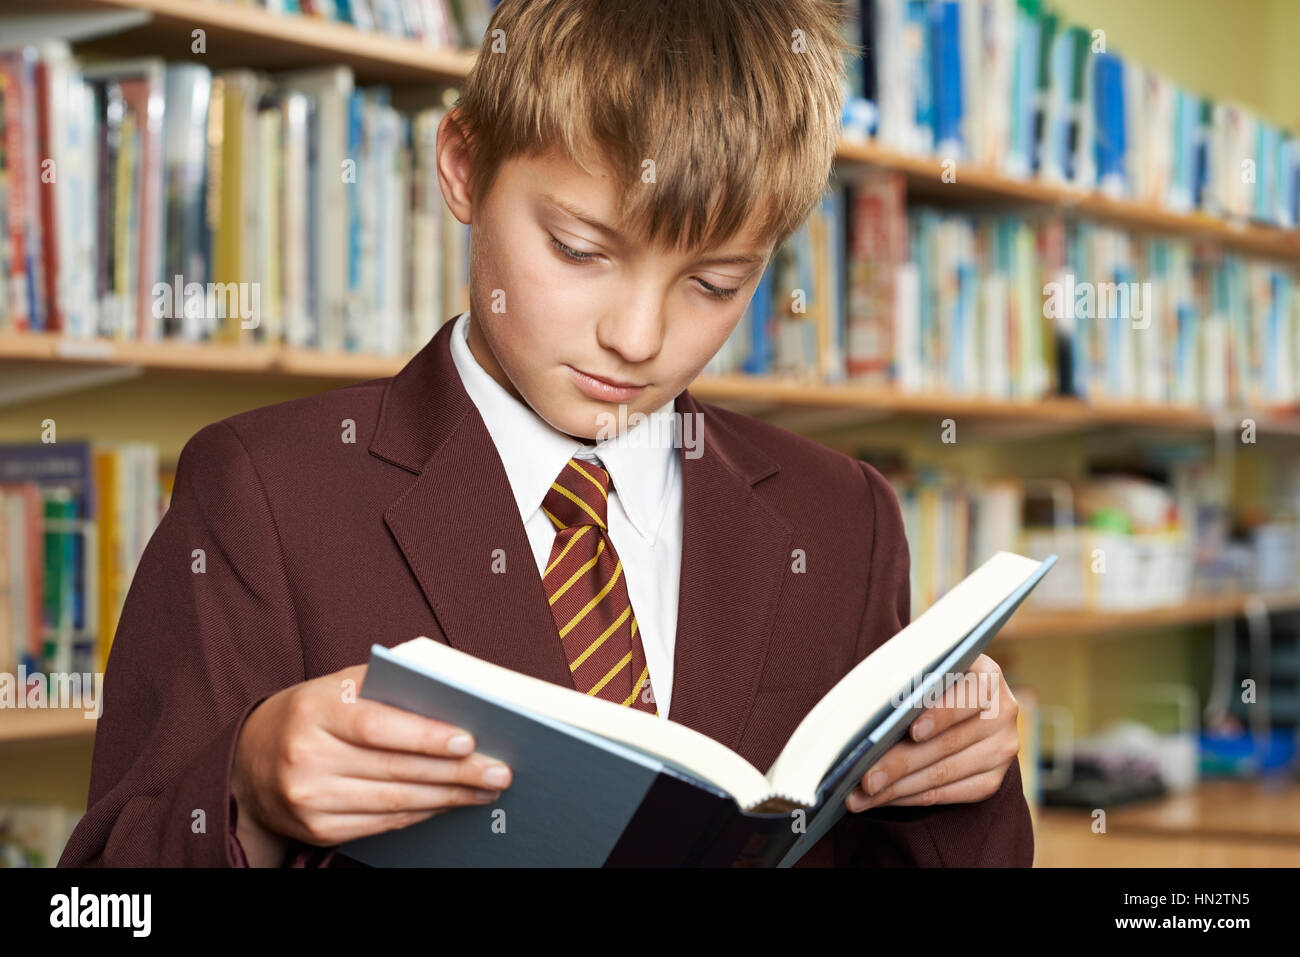 Boy Wearing School Uniform Reading Book in Library Banque D'Images